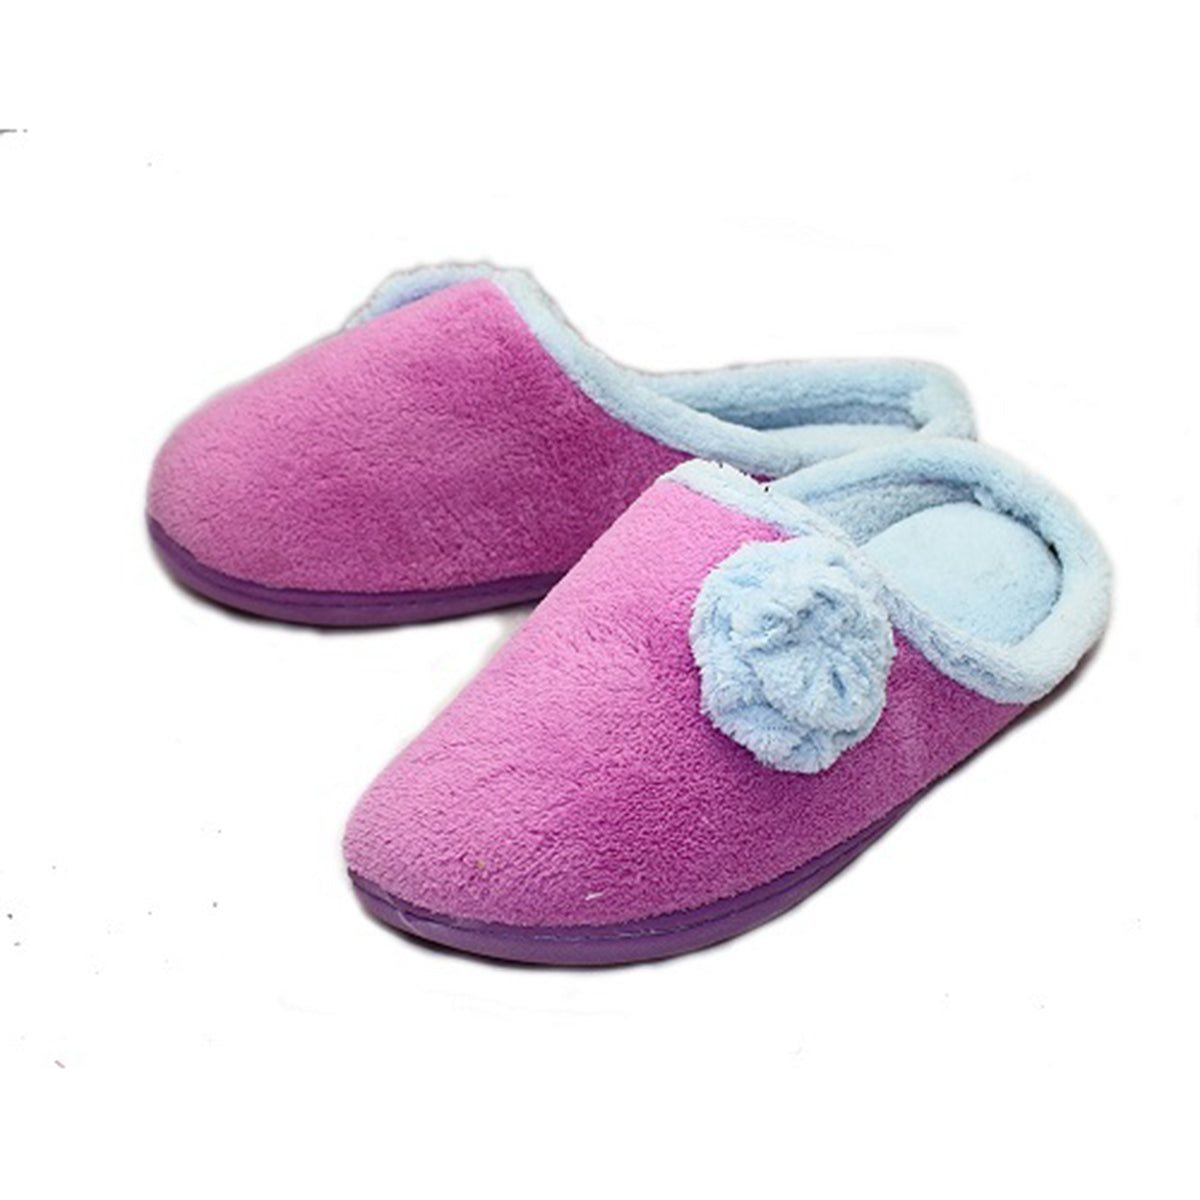 Lilac Slip On Mule Soft Mule Slippers with rosette detail